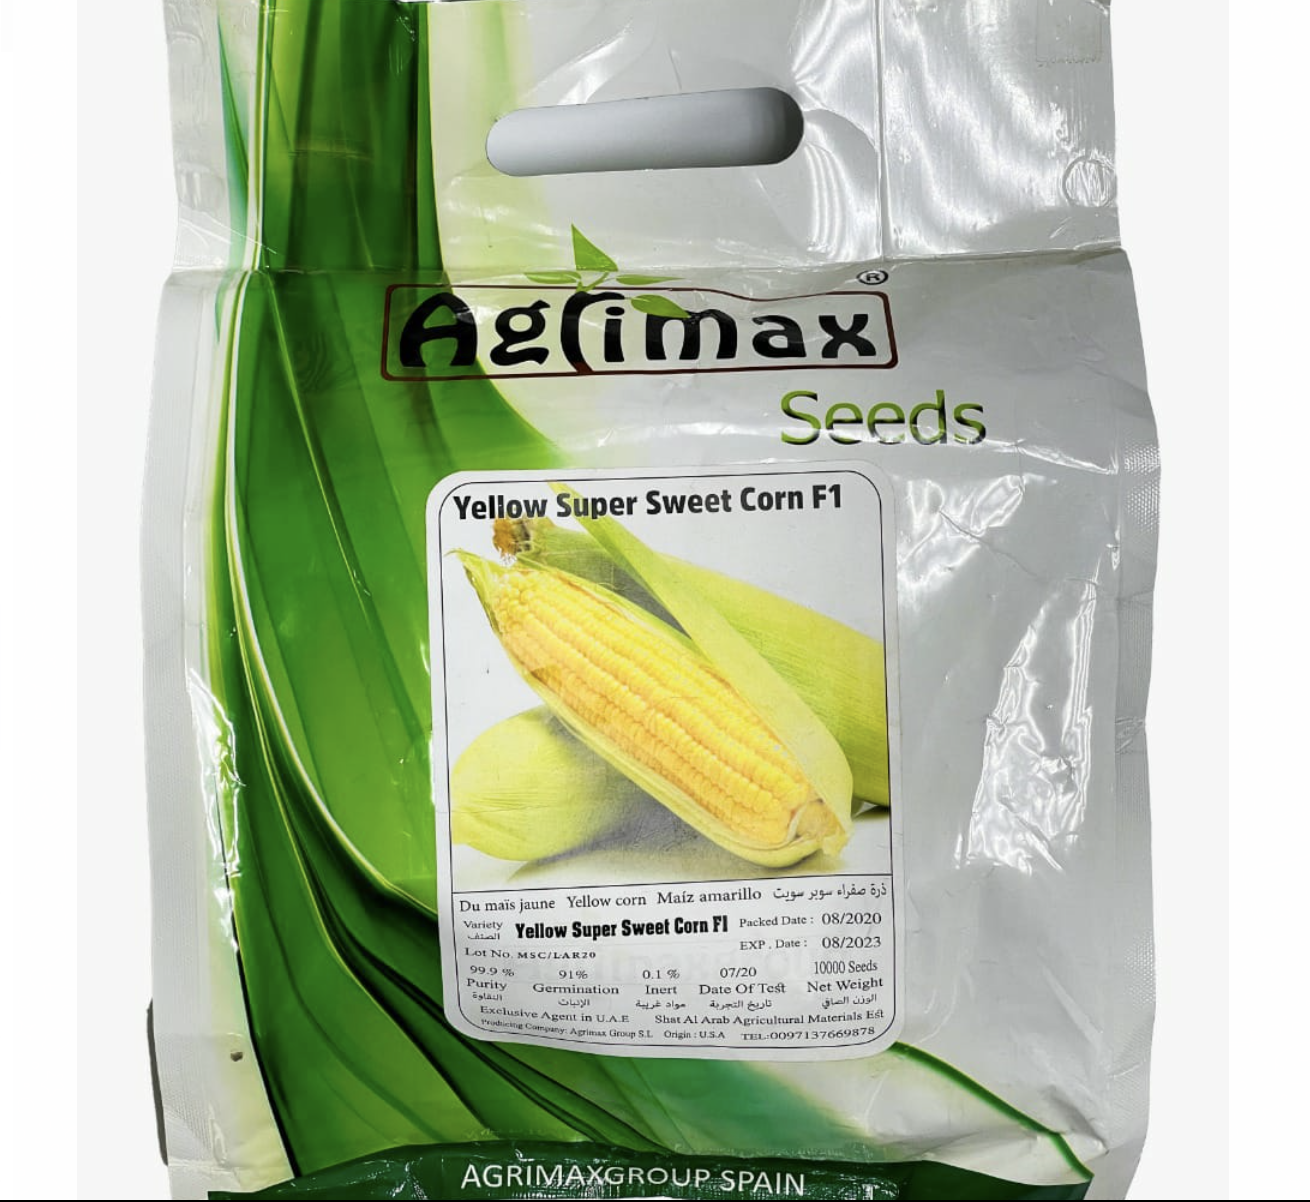 Yellow Super Sweet Corn Seeds "Hybrid F1" by Agrimax